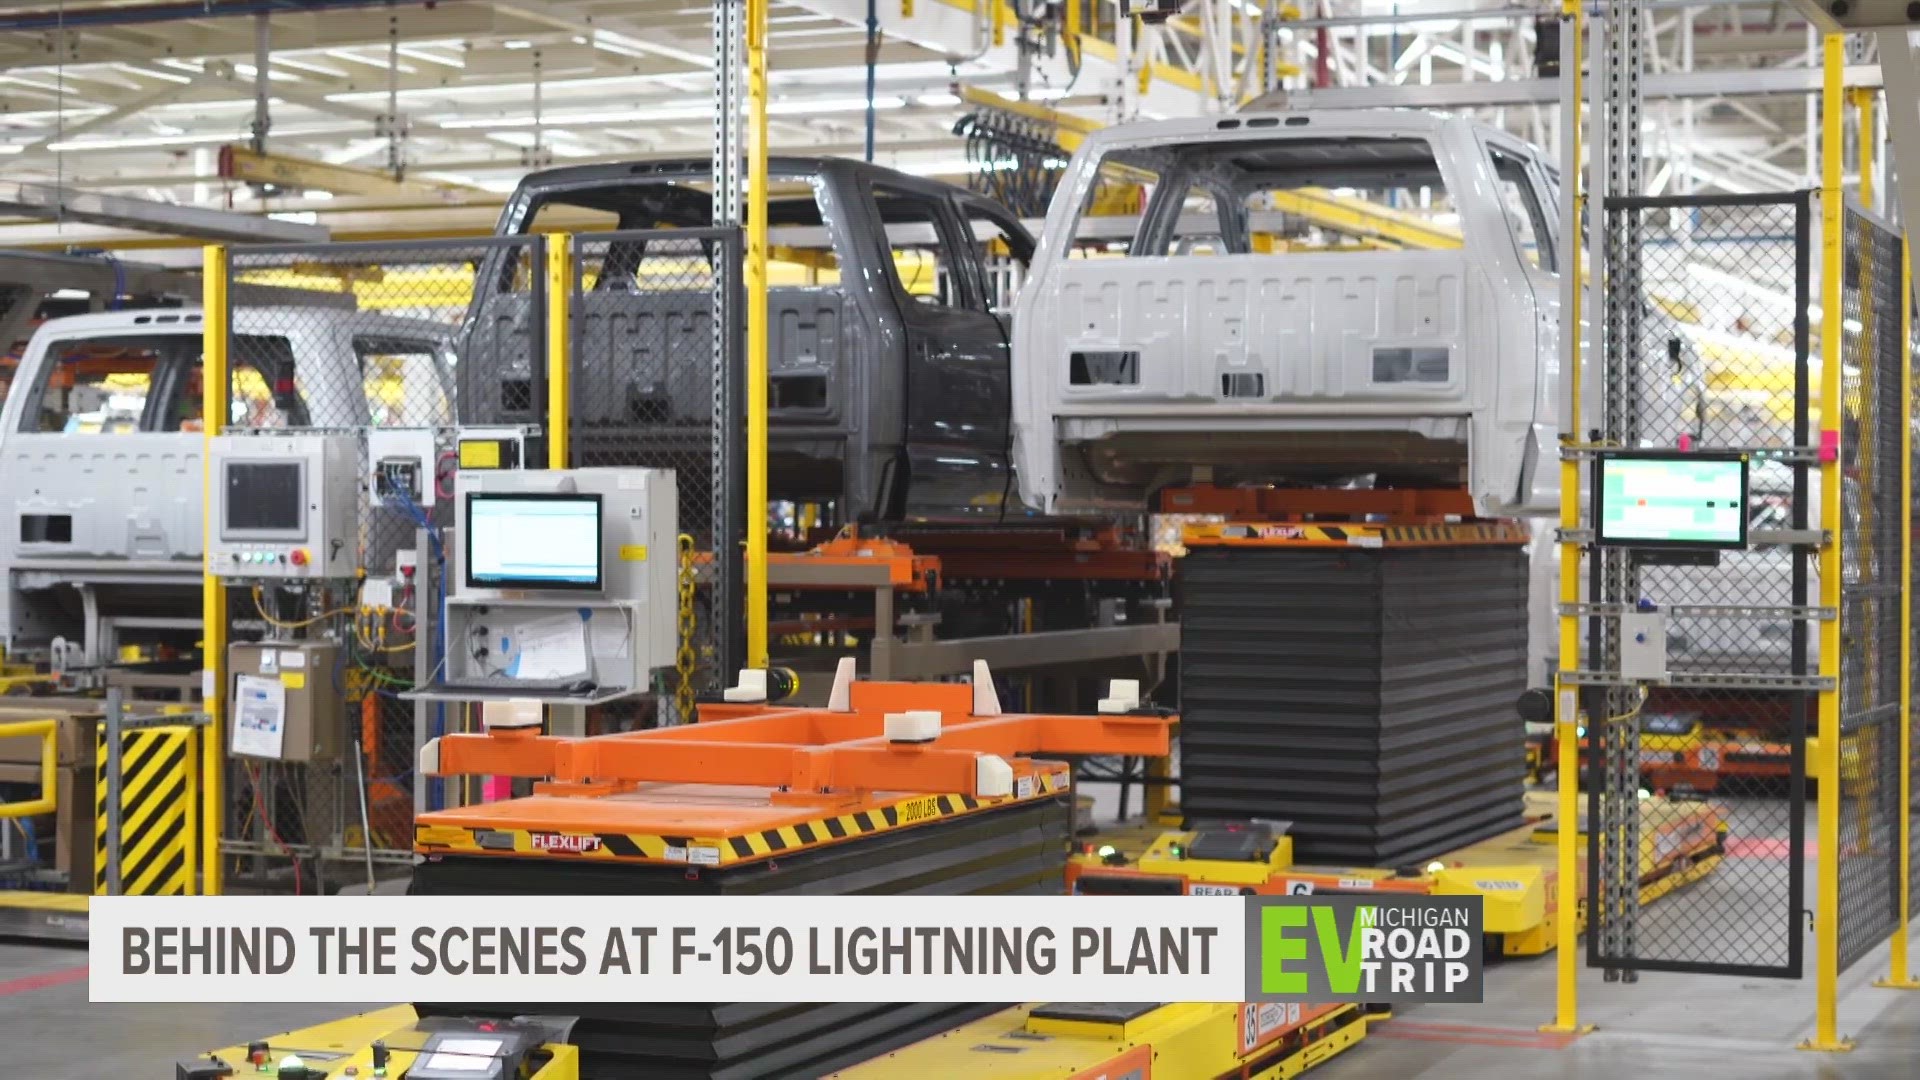 The plant is under construction right now. Once that's complete in the fall, they expect to make 150,000 trucks annually.